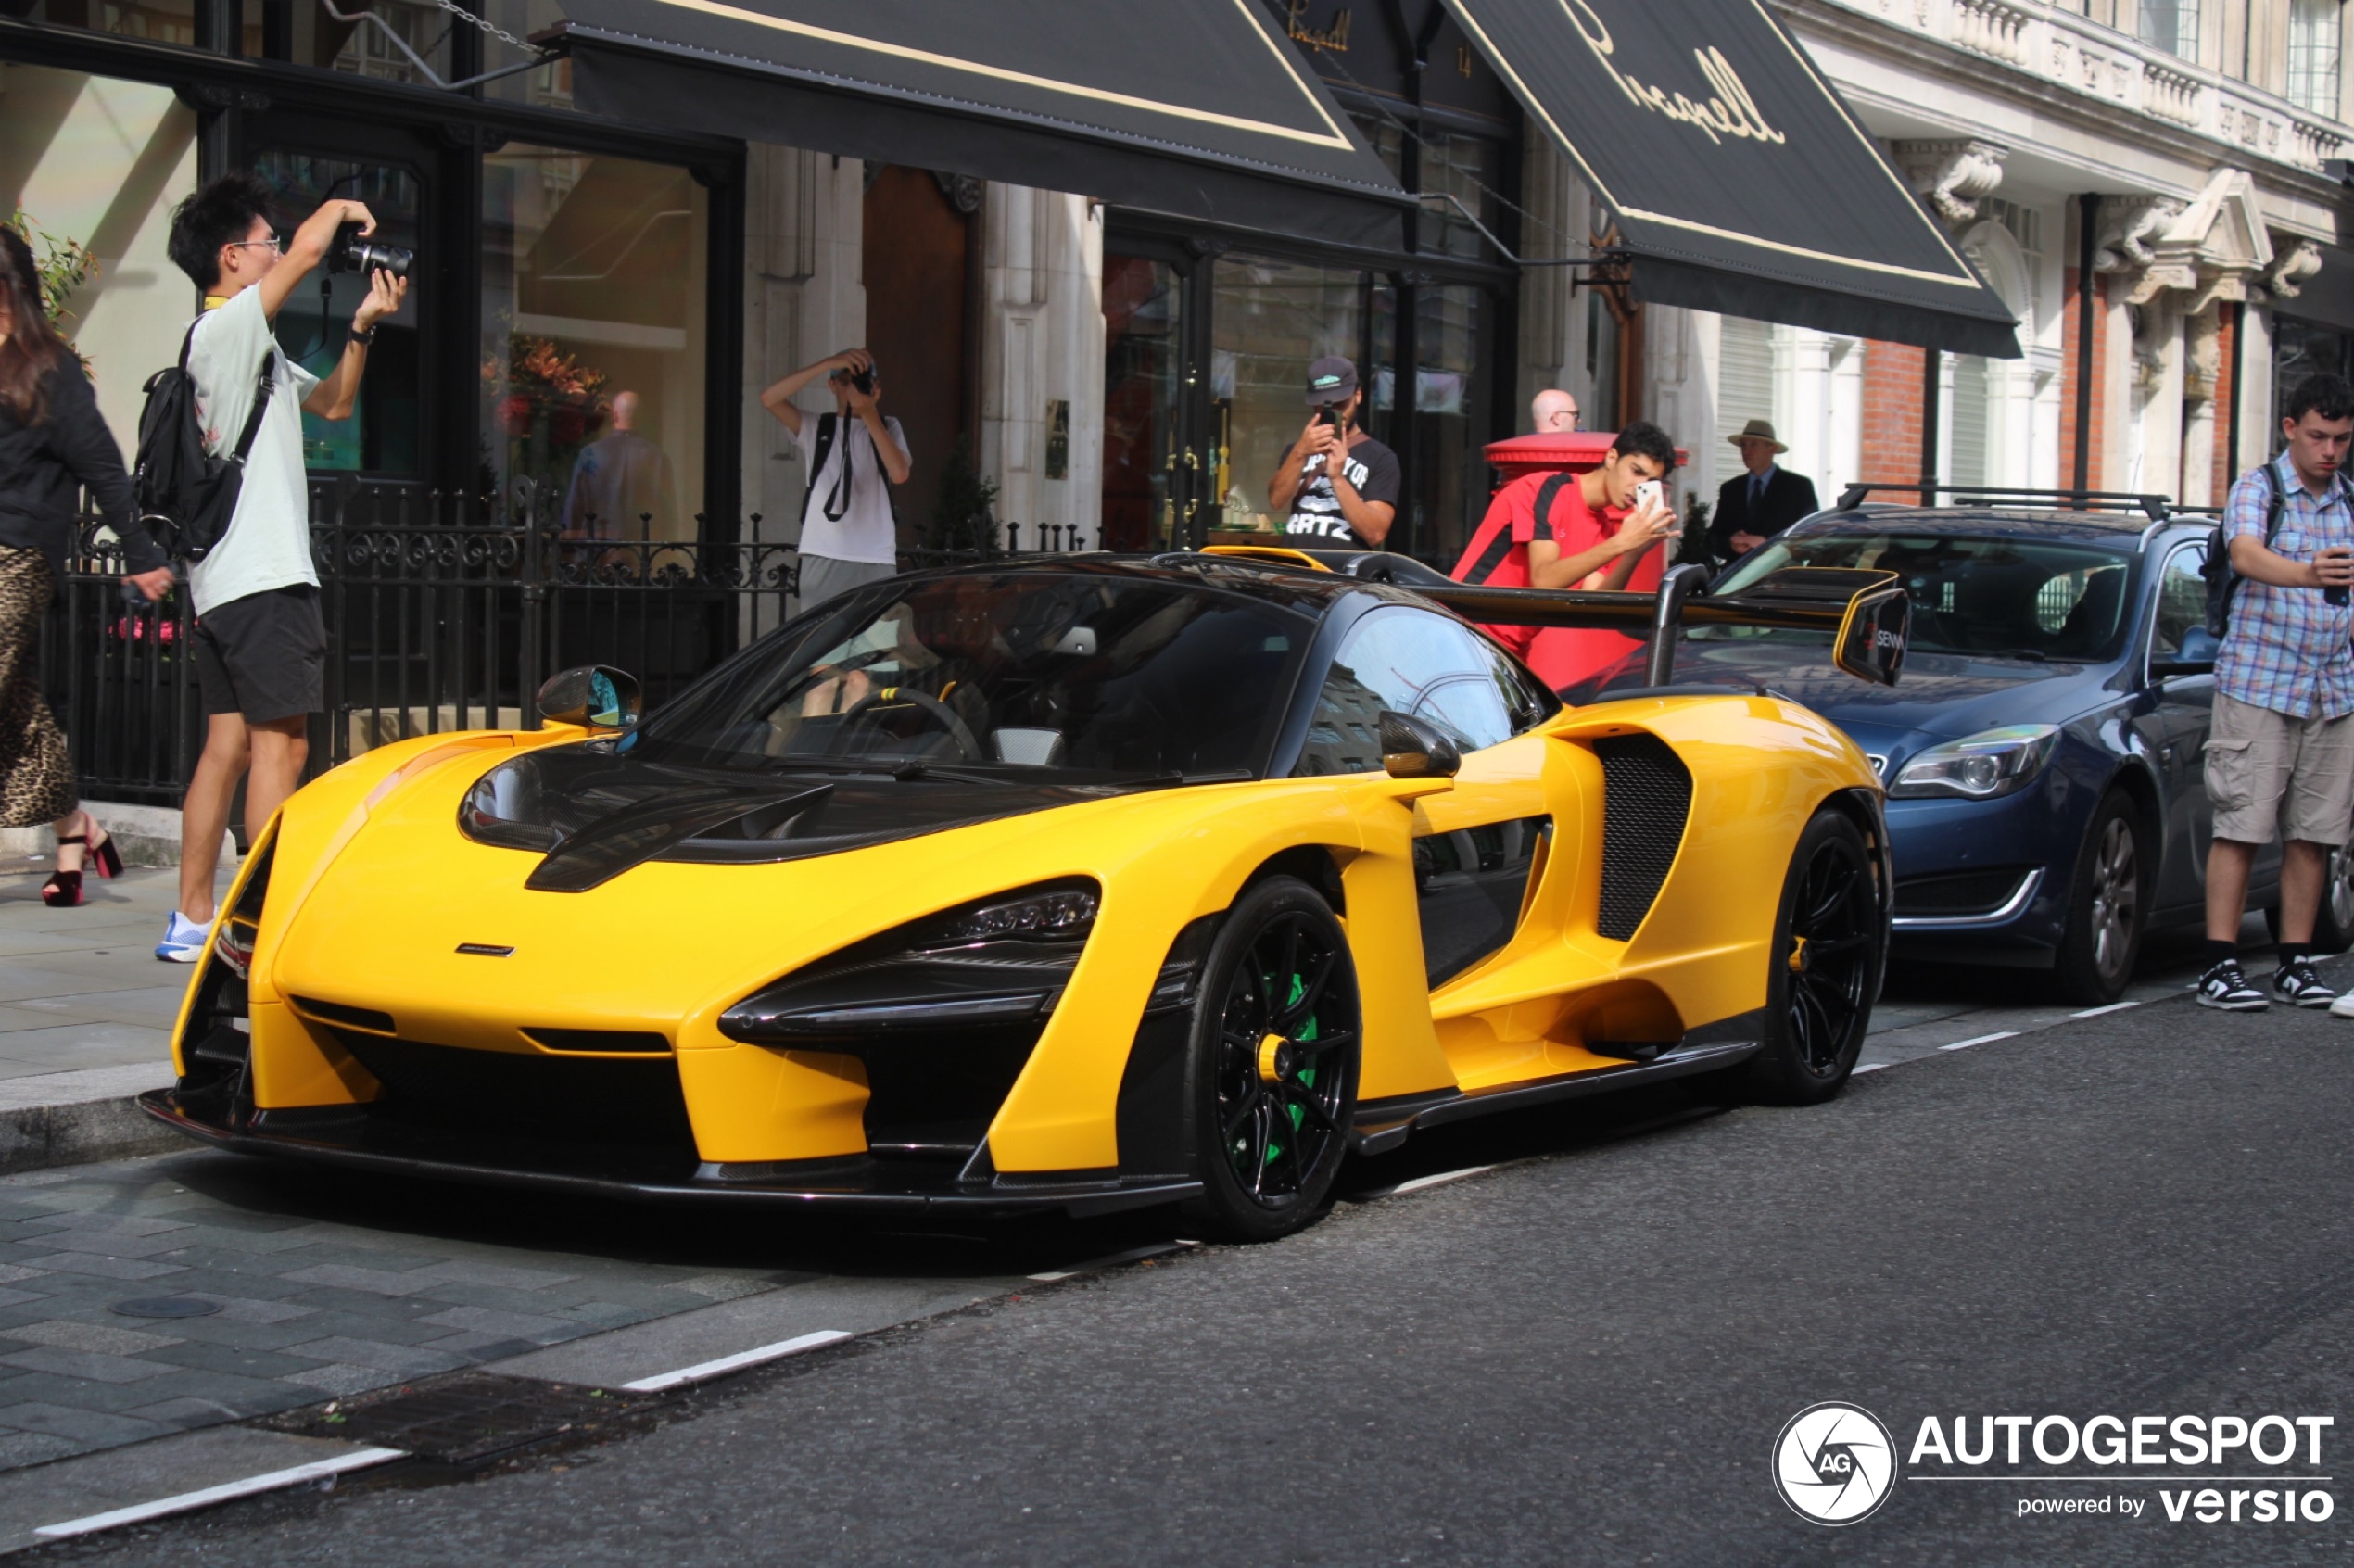 Again this Senna shows up in London